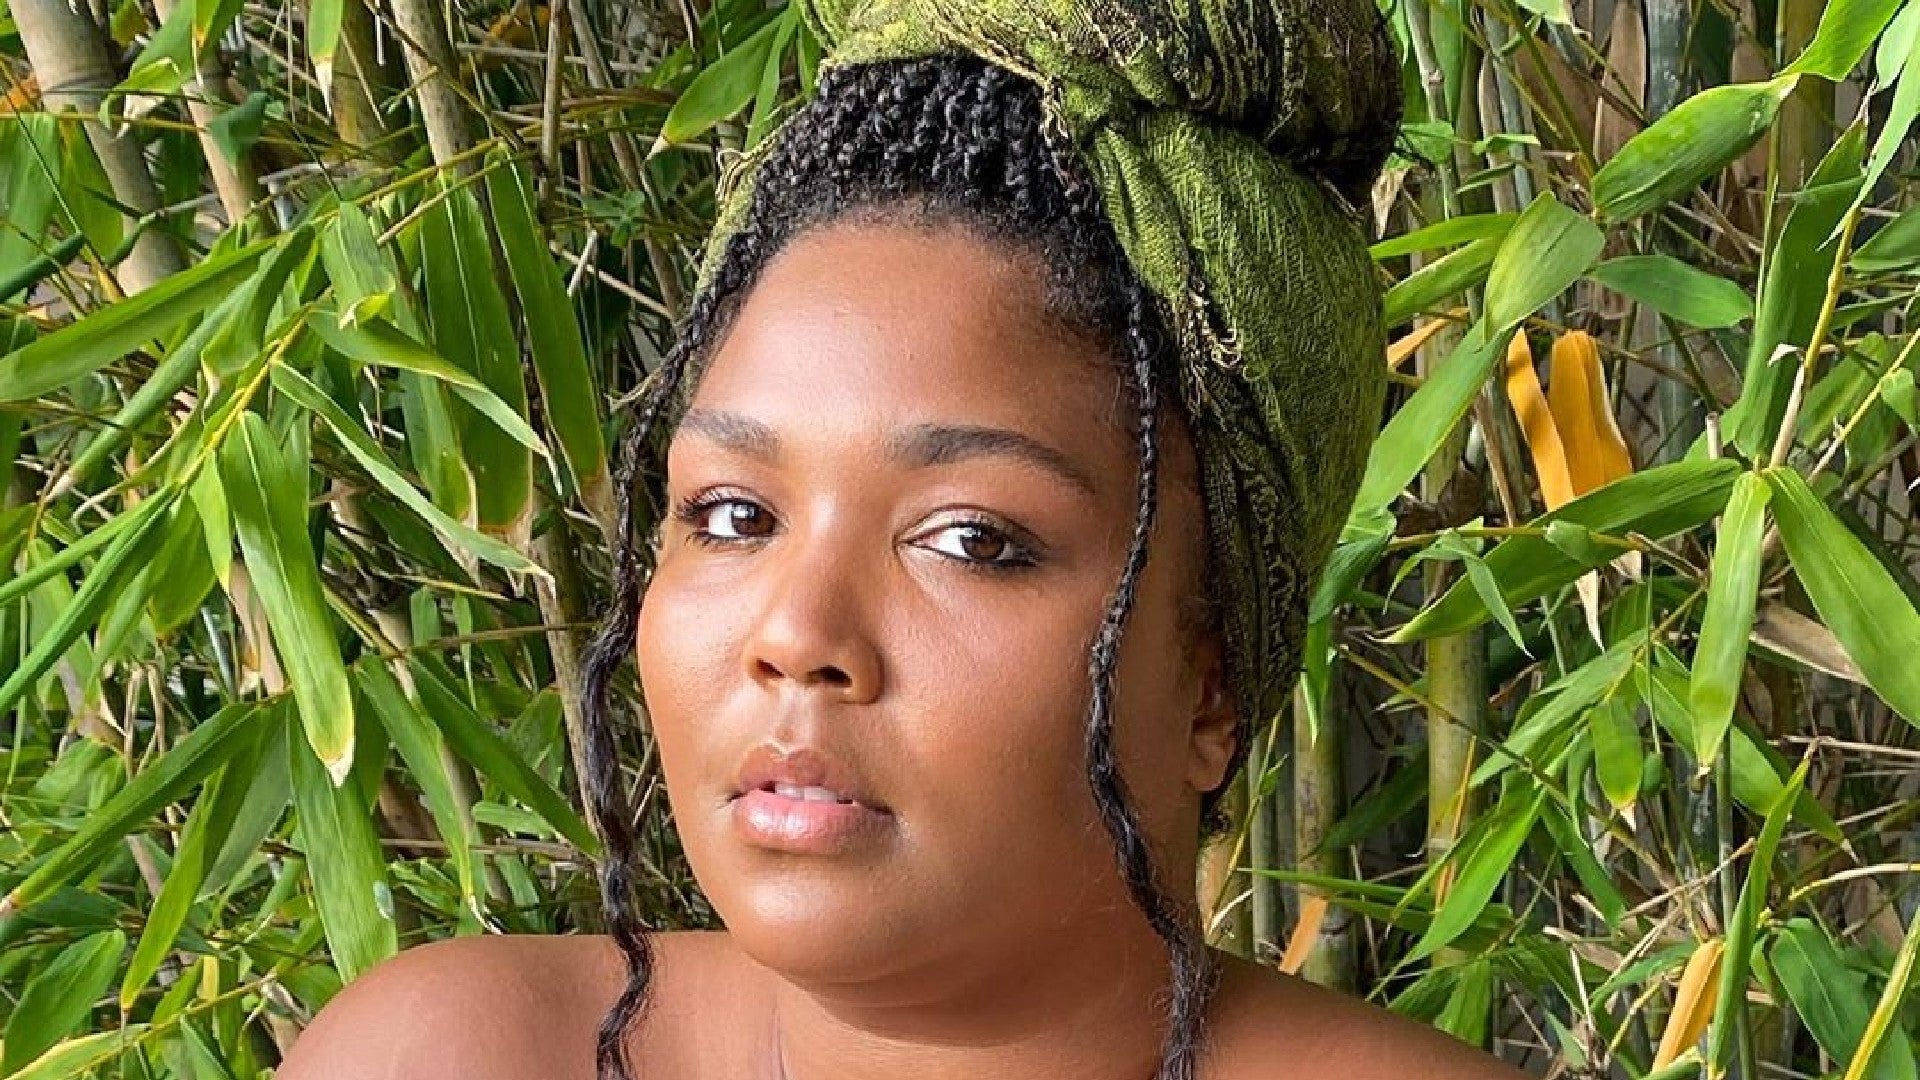 Lizzo, Rico Nasty, China McClain And Other Celebrity Beauty Looks Of The Week